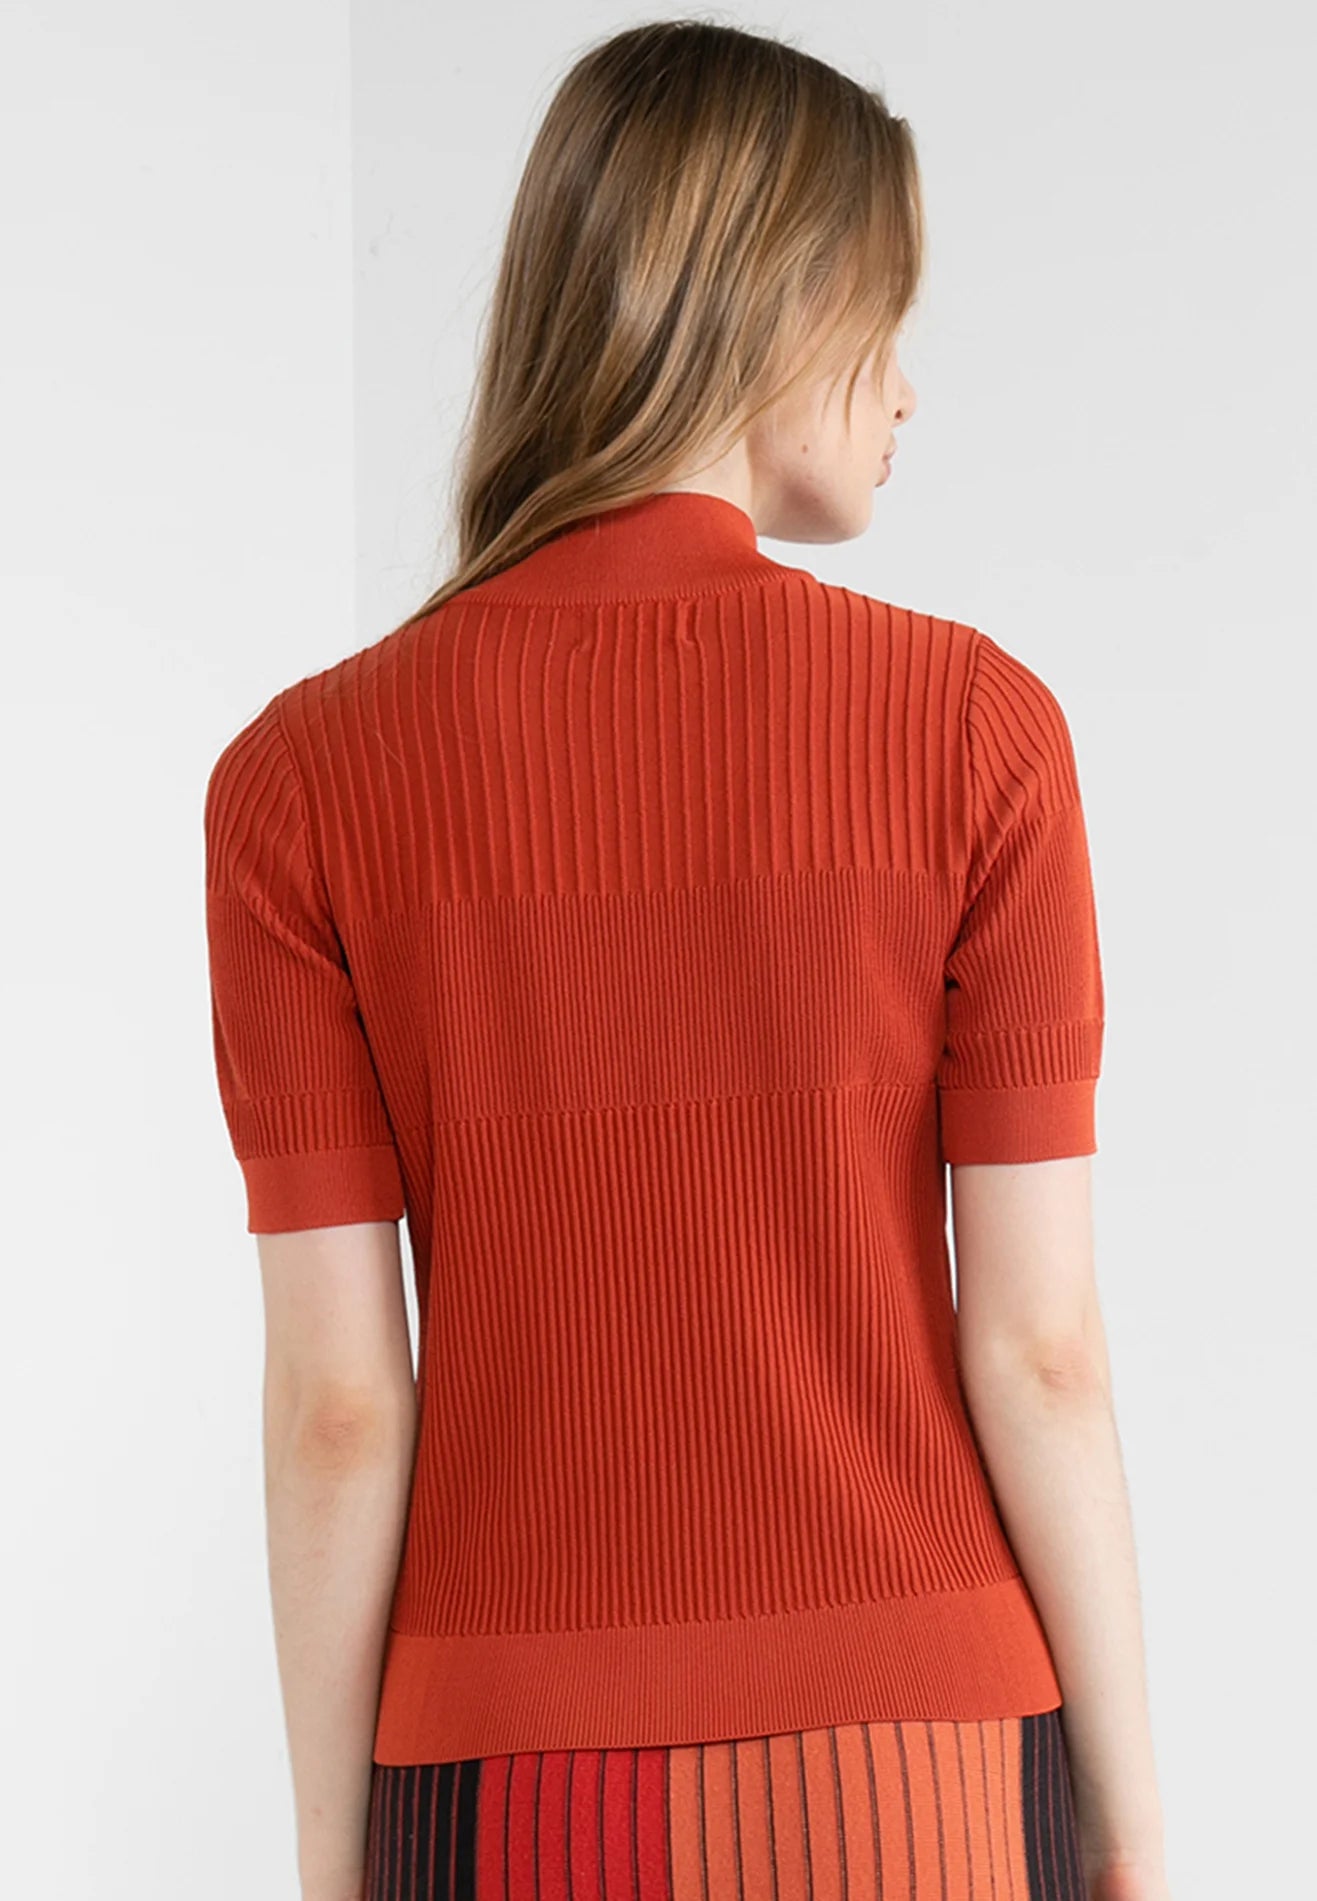 ELLE Apparel Logo Knitted Top